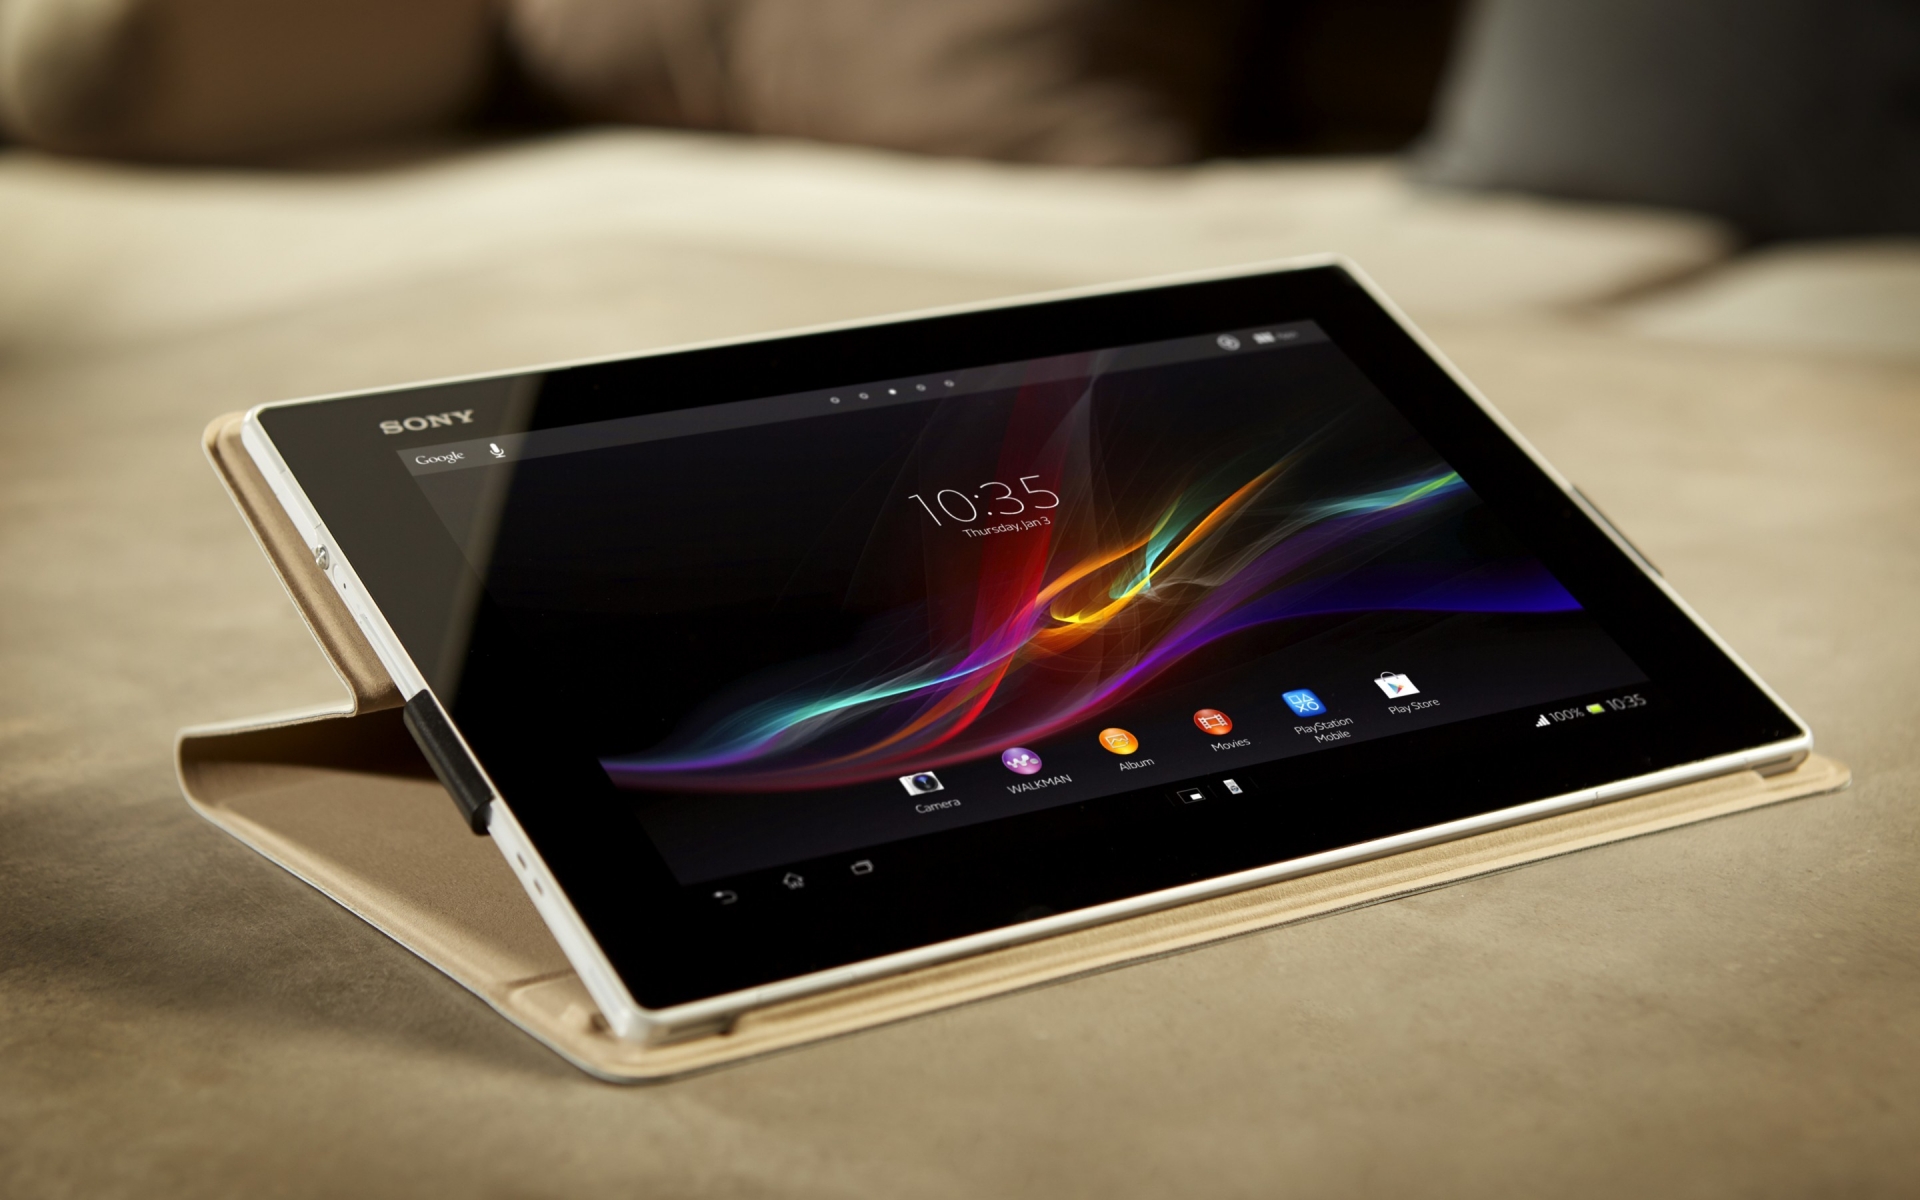 Sony Xperia Tablet Z for 1920 x 1200 widescreen resolution